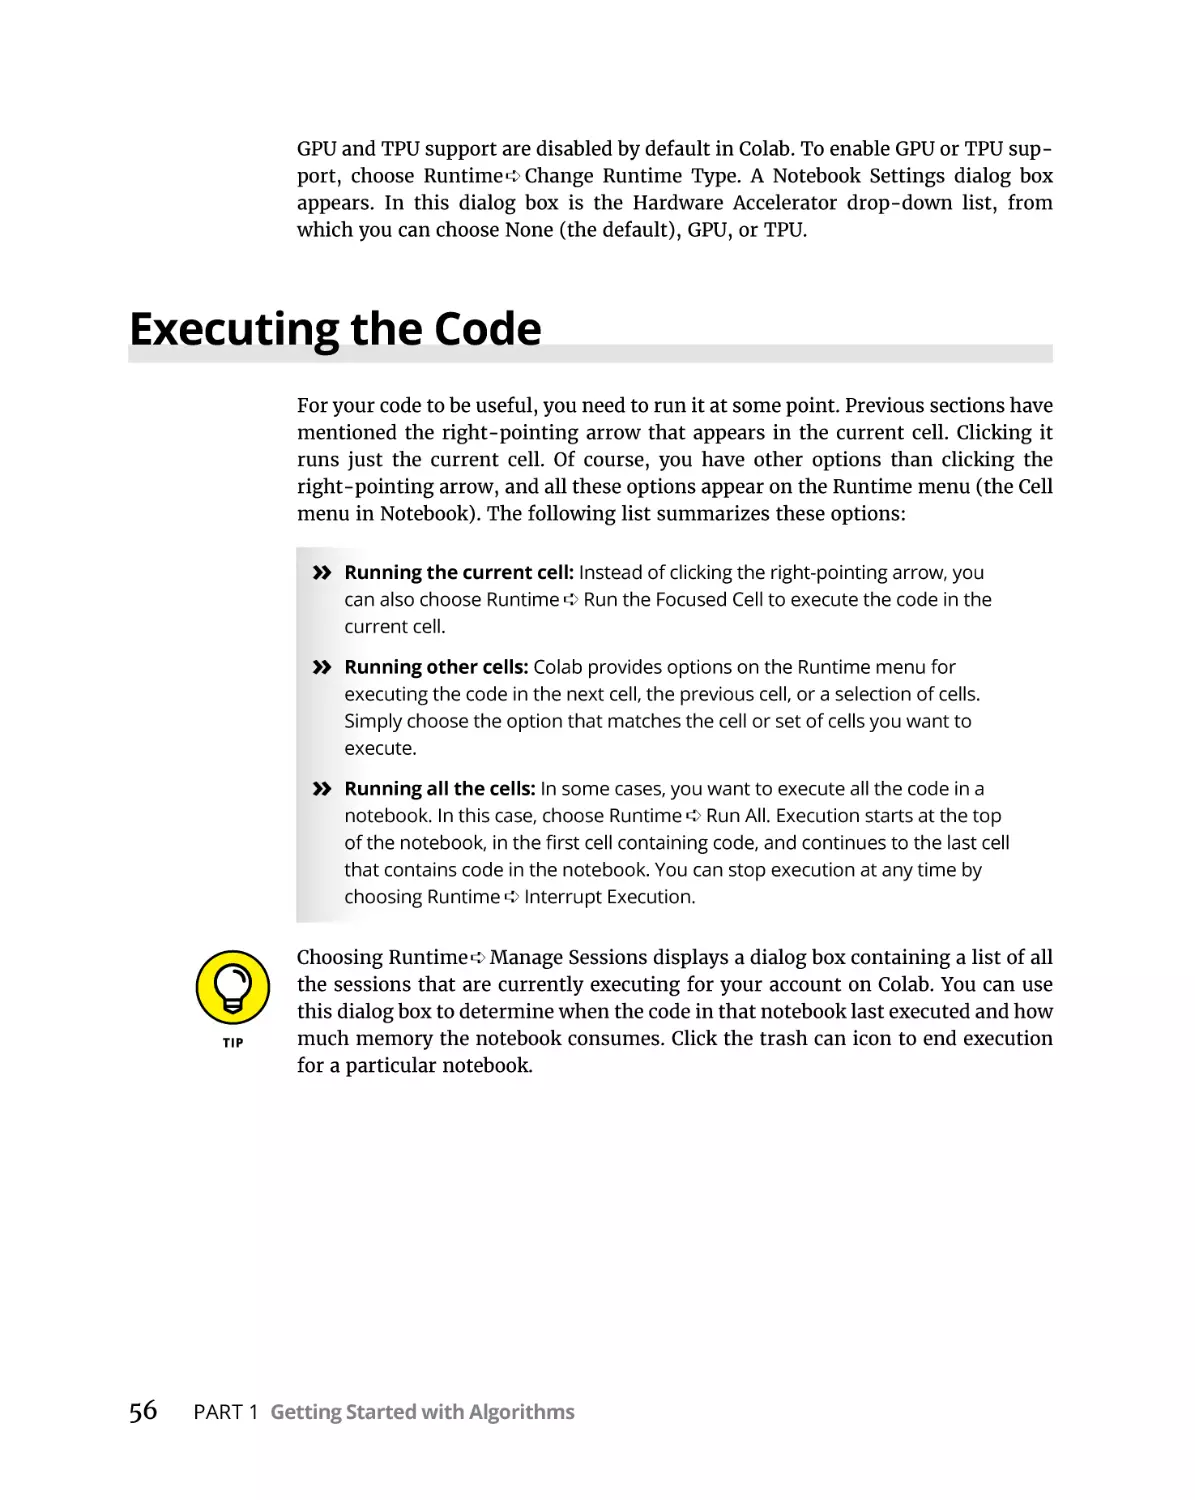 Executing the Code